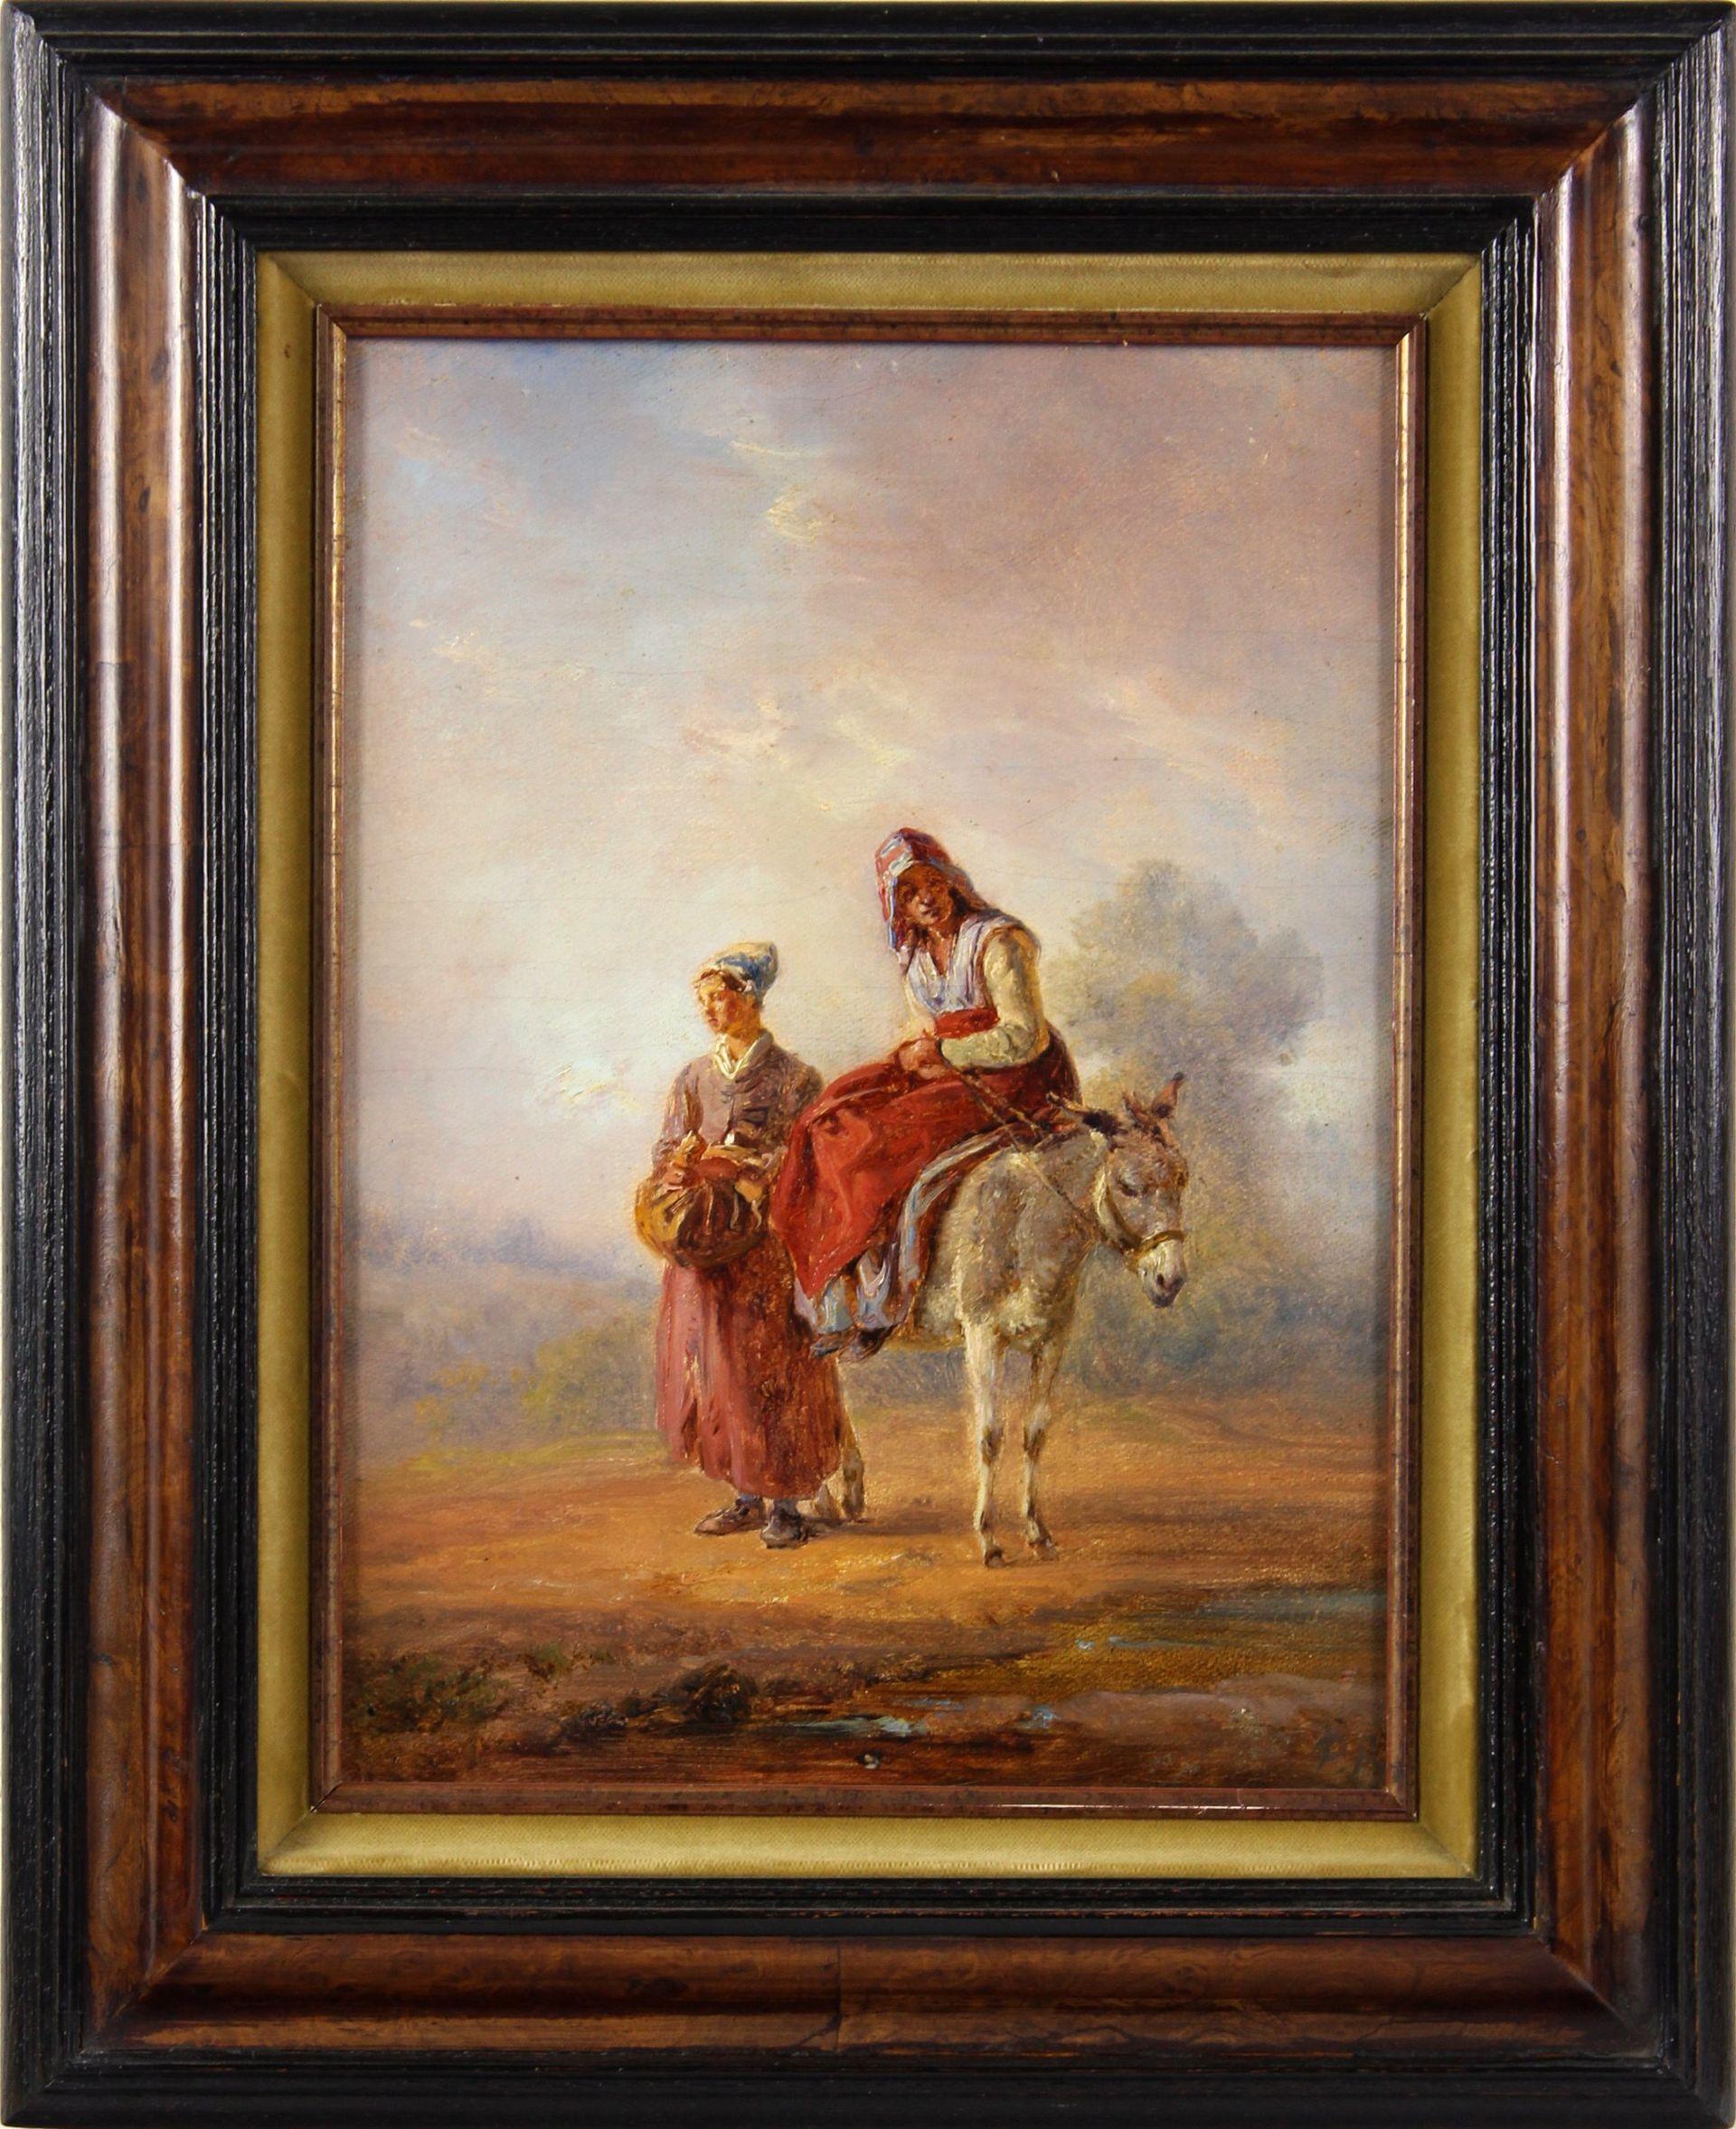 Two countrywomen with a donkey - Melancholy in an atmosphere of colour - - Painting by Pierre Louis De La Rive